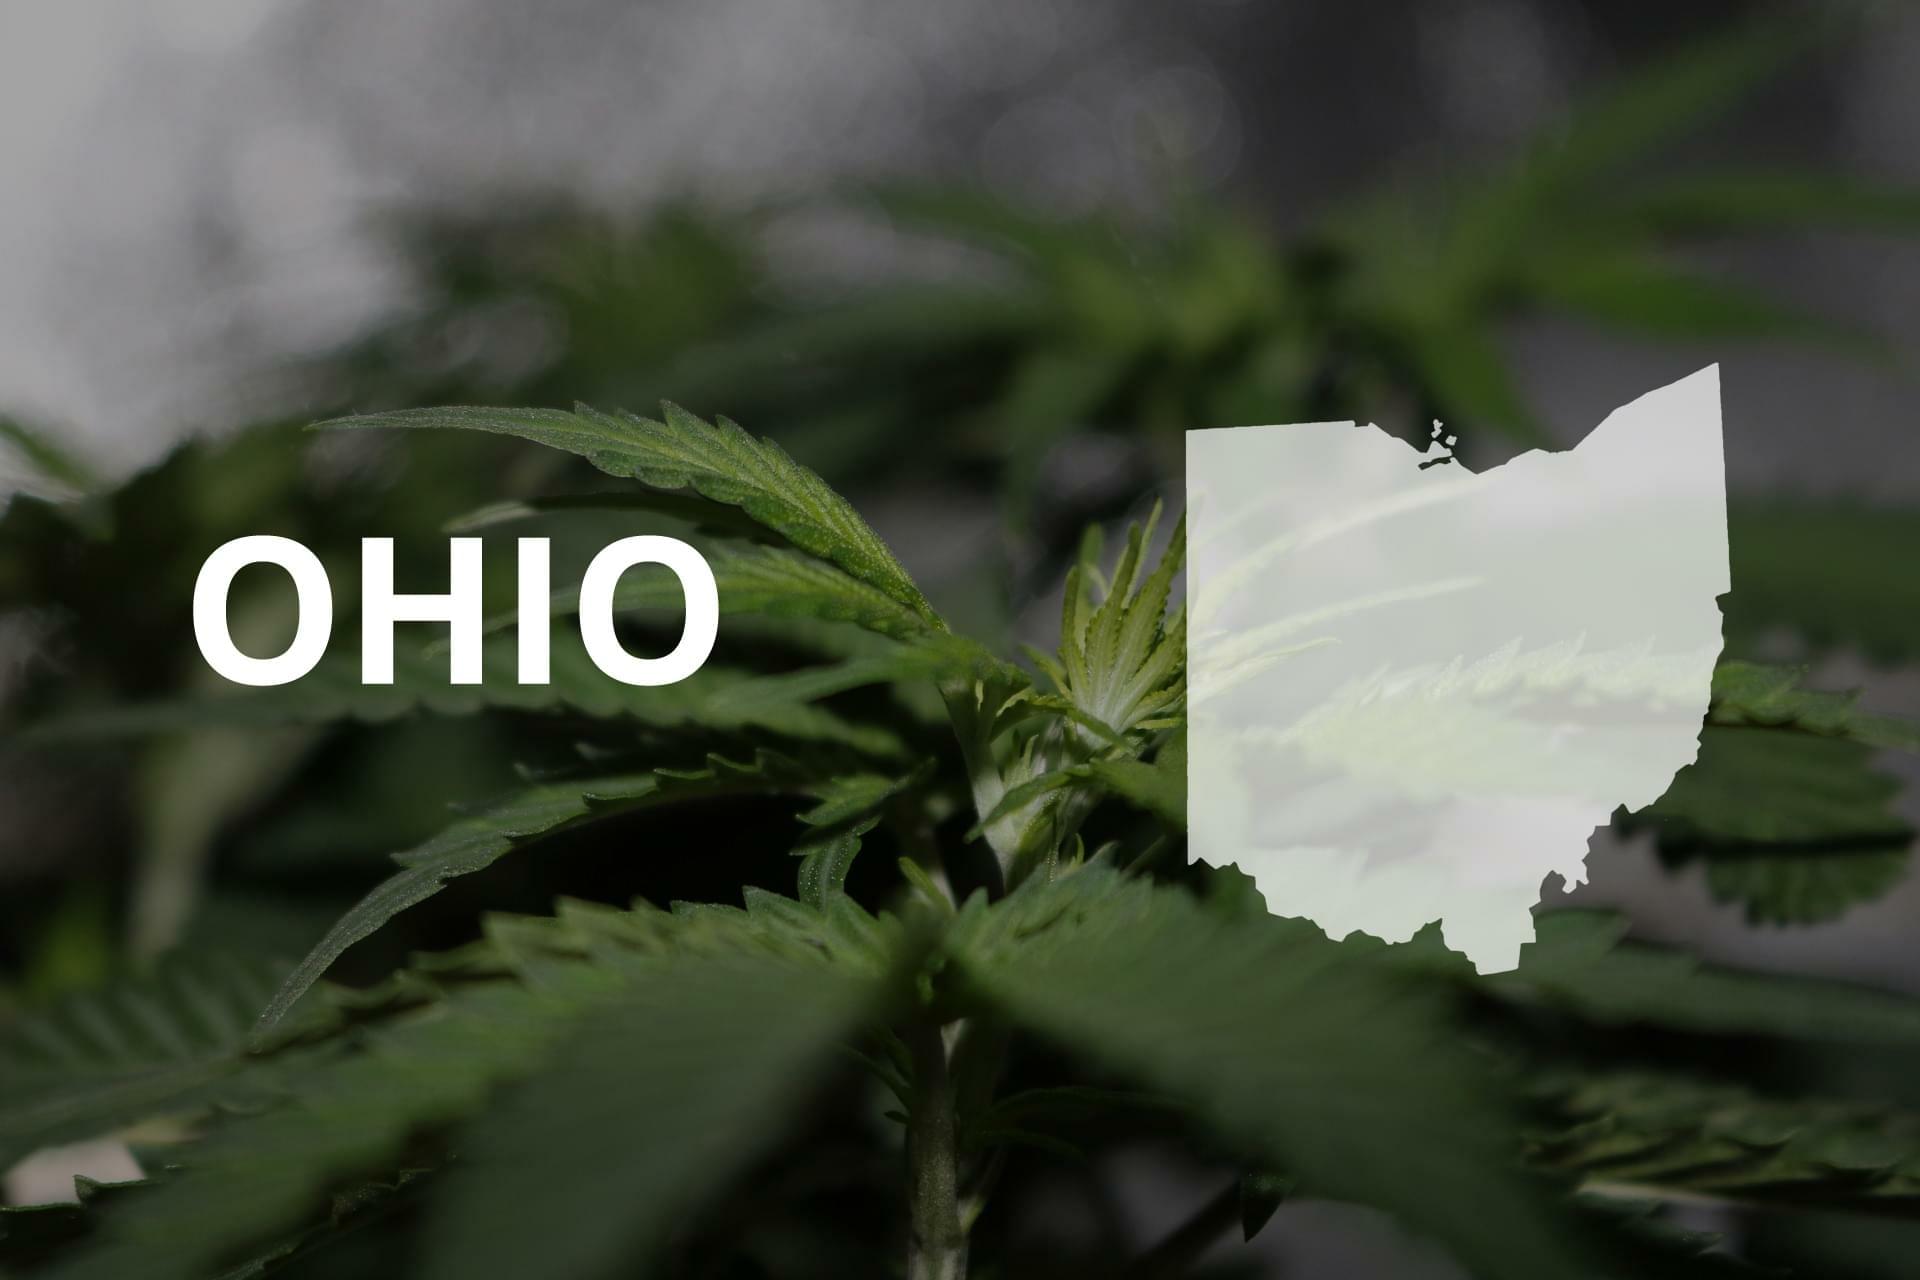 Ohio docs writing recs for patients to buy medical marijuana in Michigan before rules ...1920 x 1280